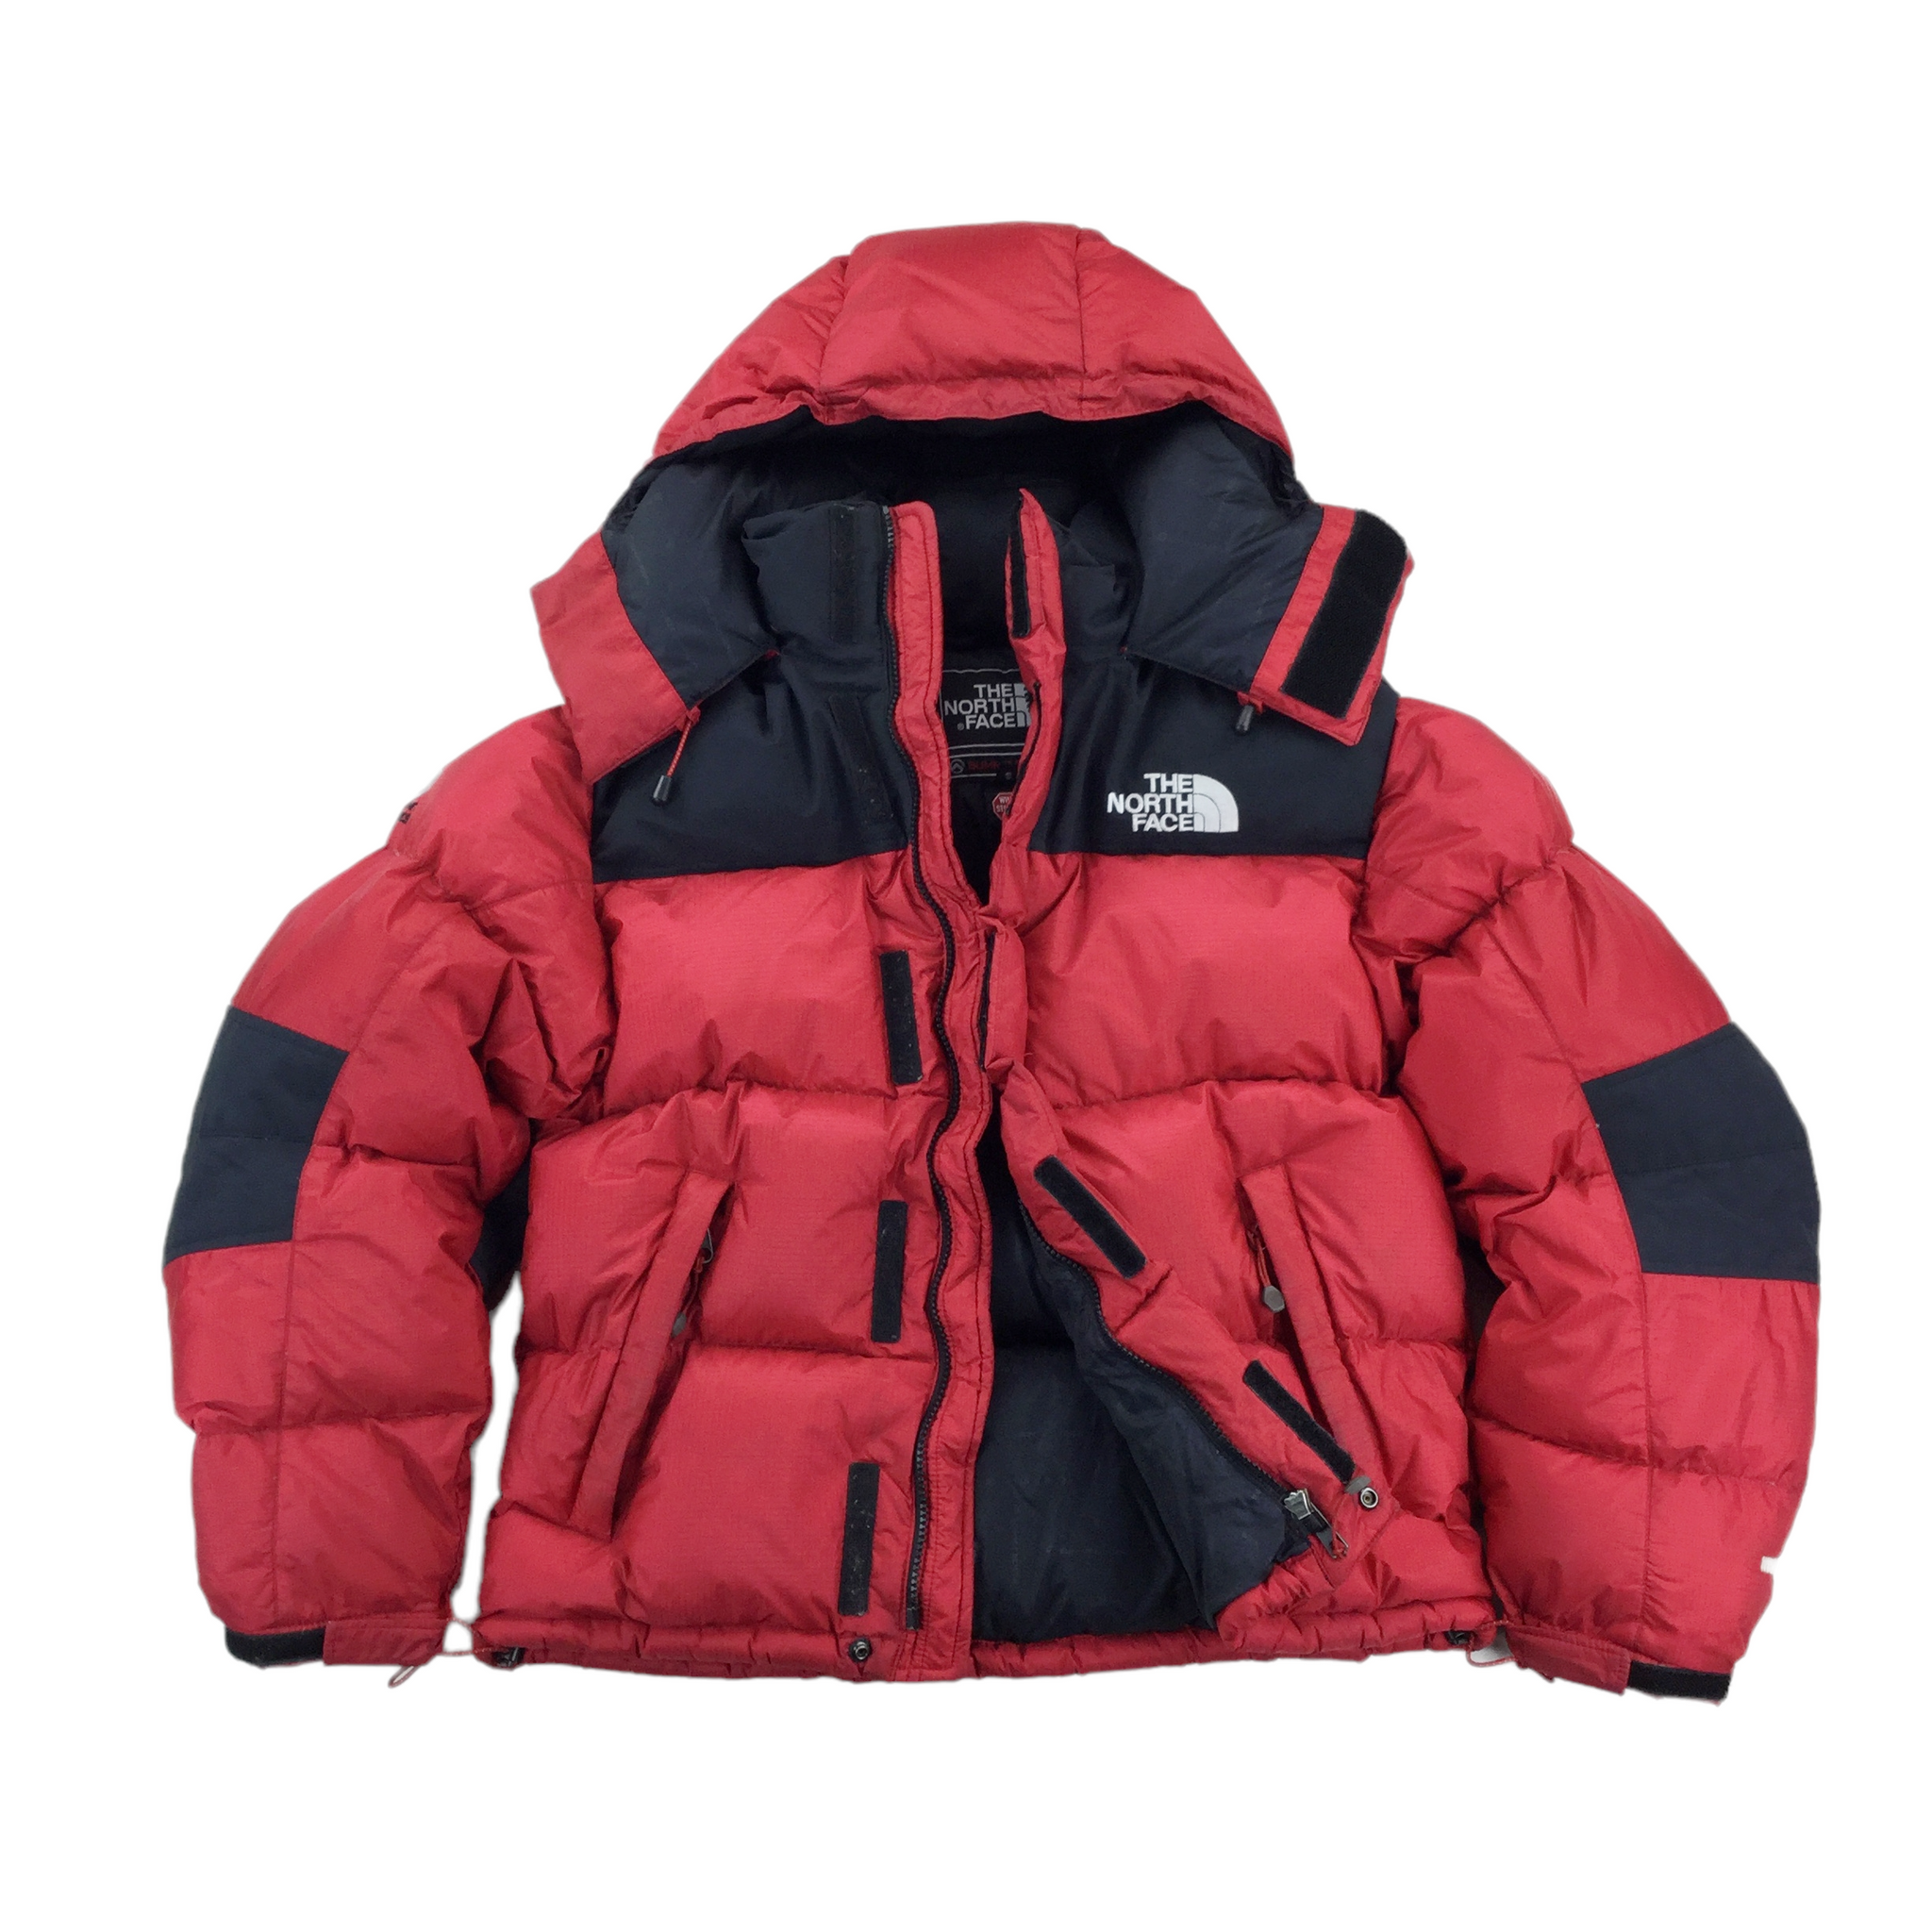 144 THE NORTH FACE 700 WINDSTOPPER ダウン